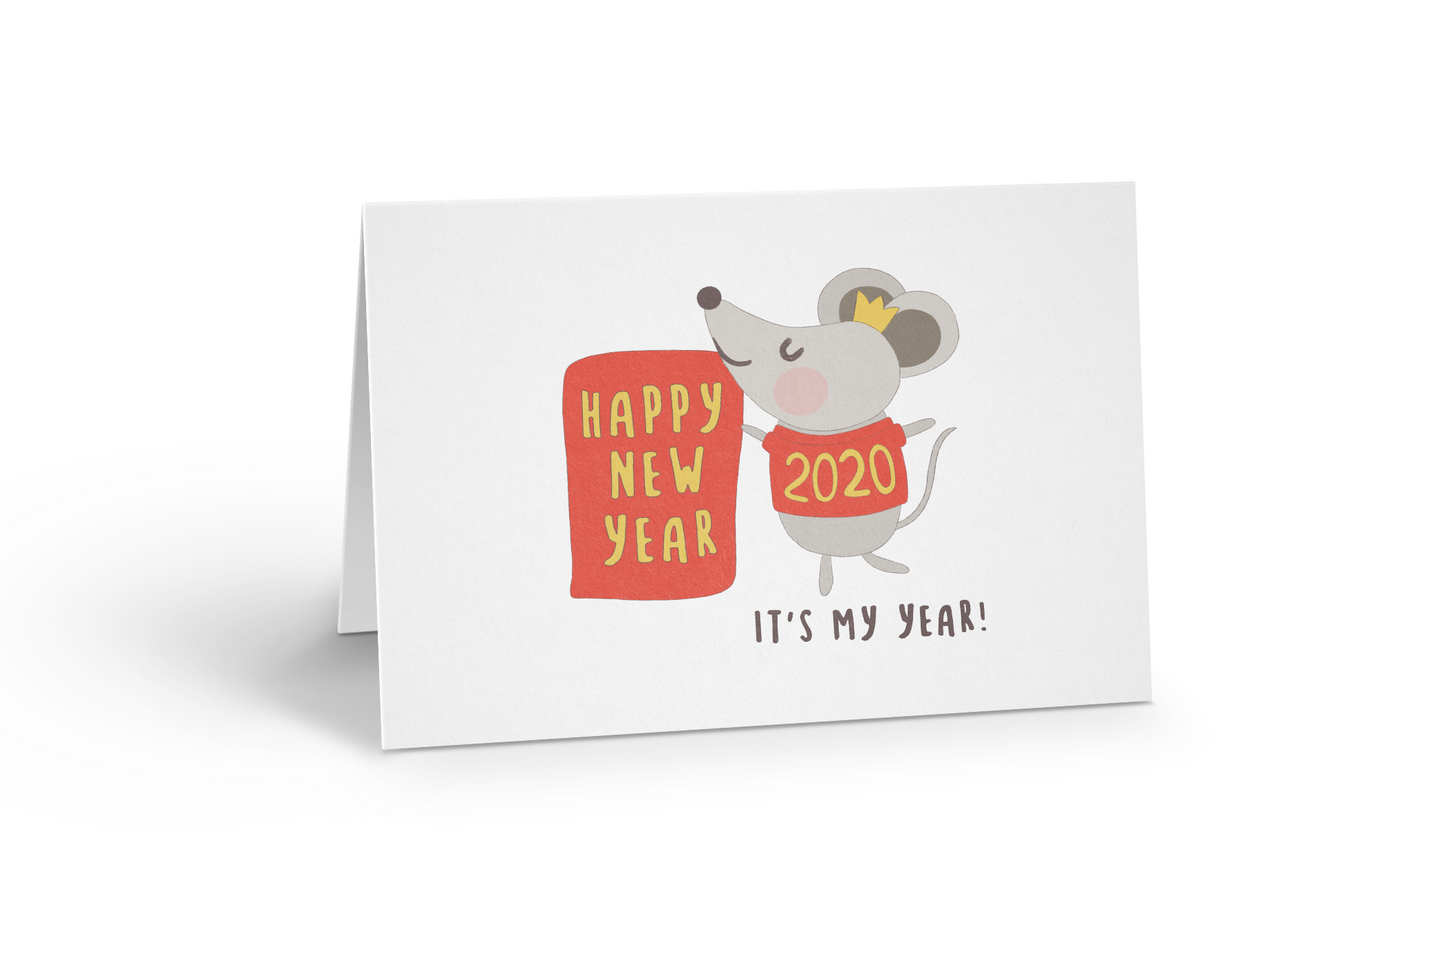 Chinese new year card, Lunar new year card, Happy new year card, Year of the Rat